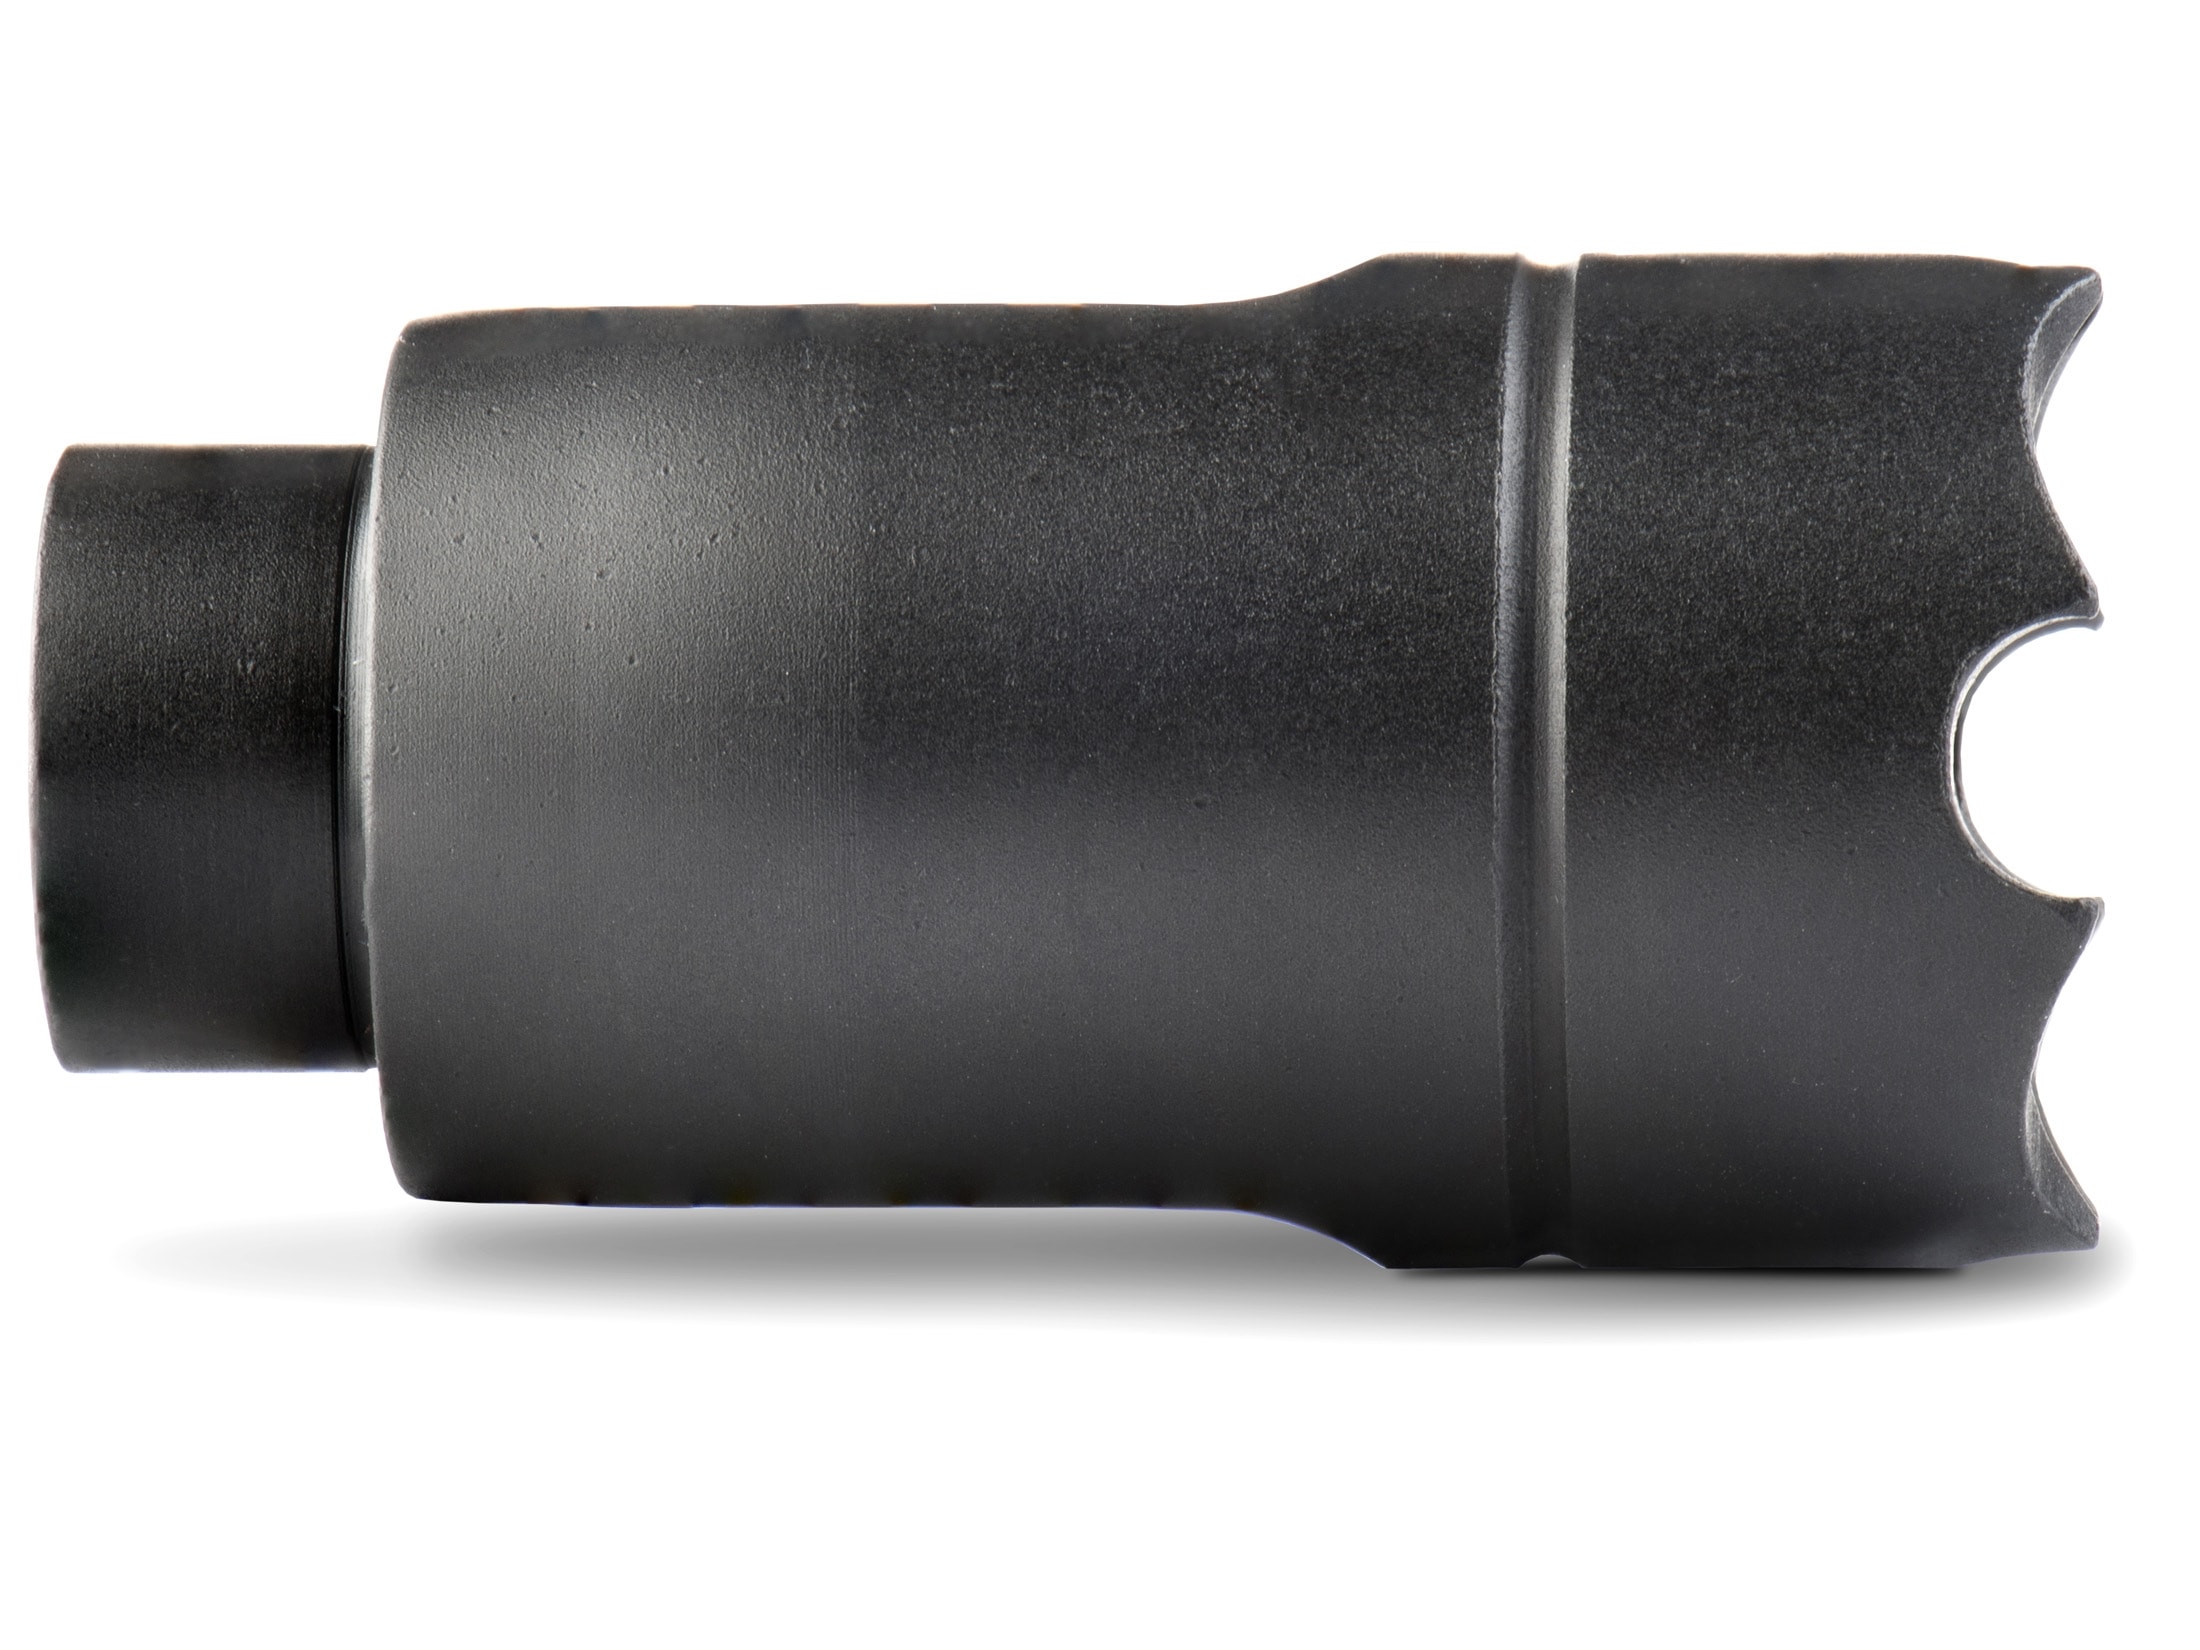 Details about    .223 1/2x28RH Muzzle Brake Stainless Competition For 5.56MM Compensator /Washer 